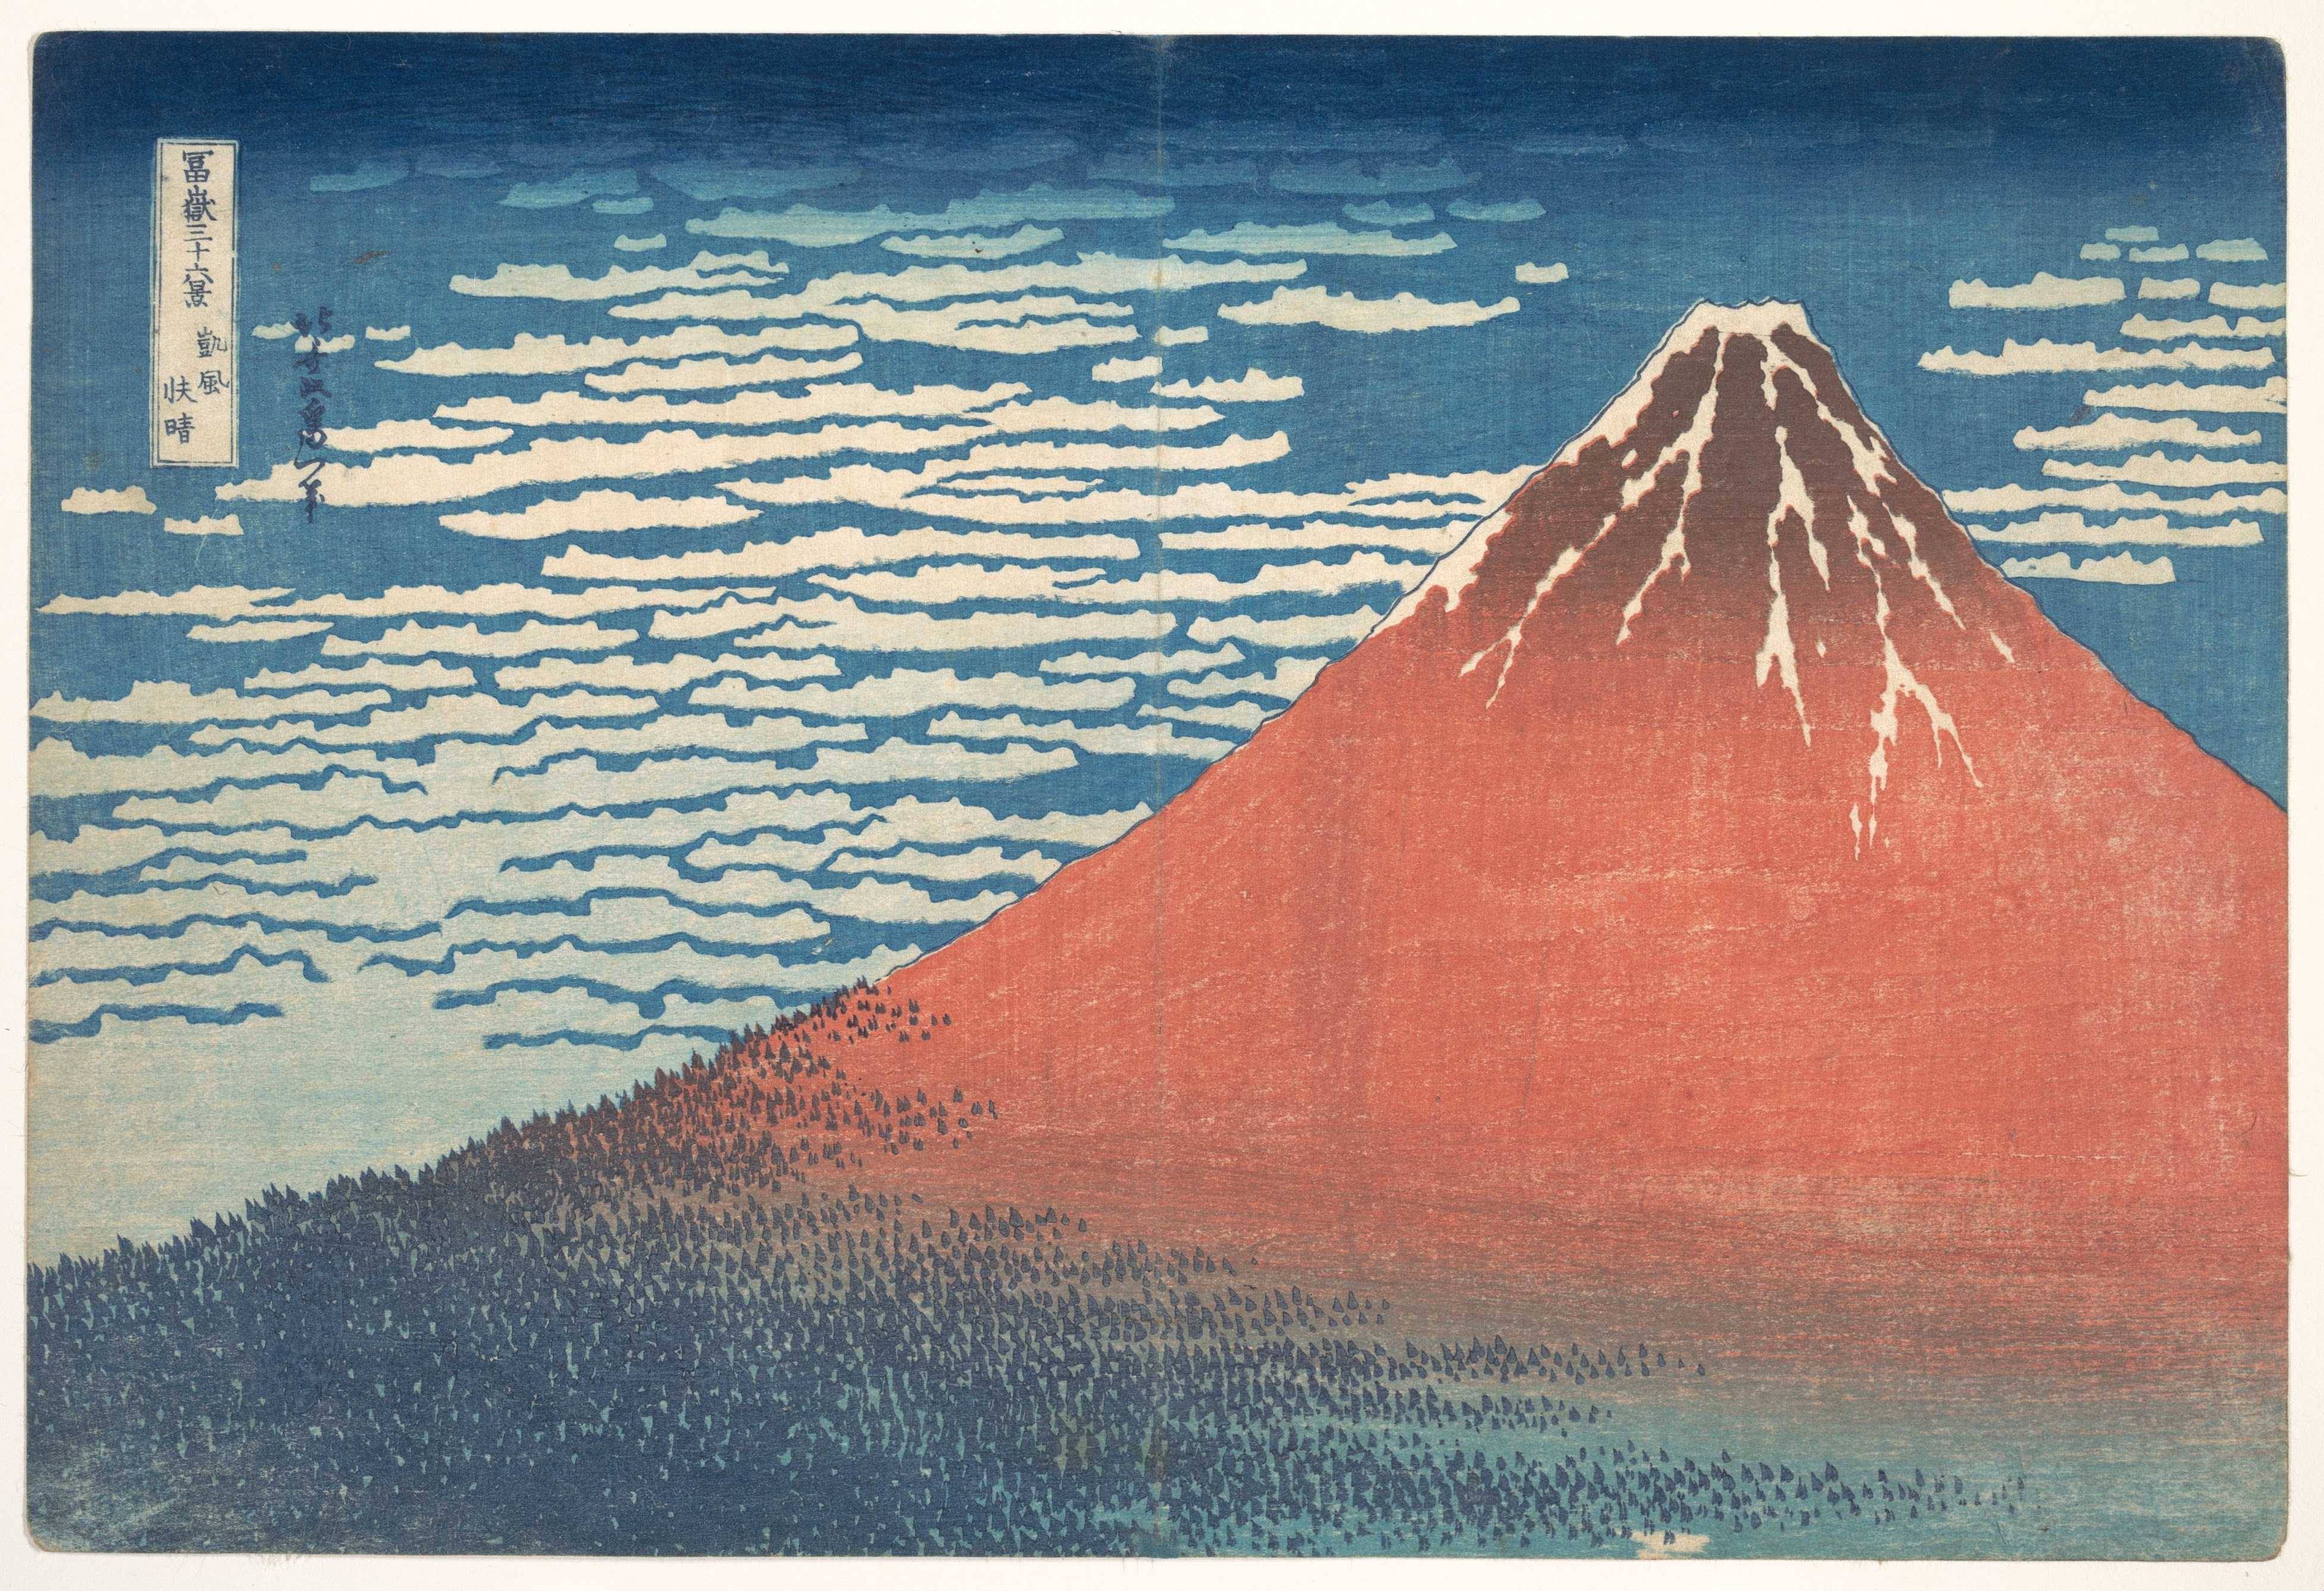 Find out more about Katsushika Hokusai - South Wind, Clear Sky